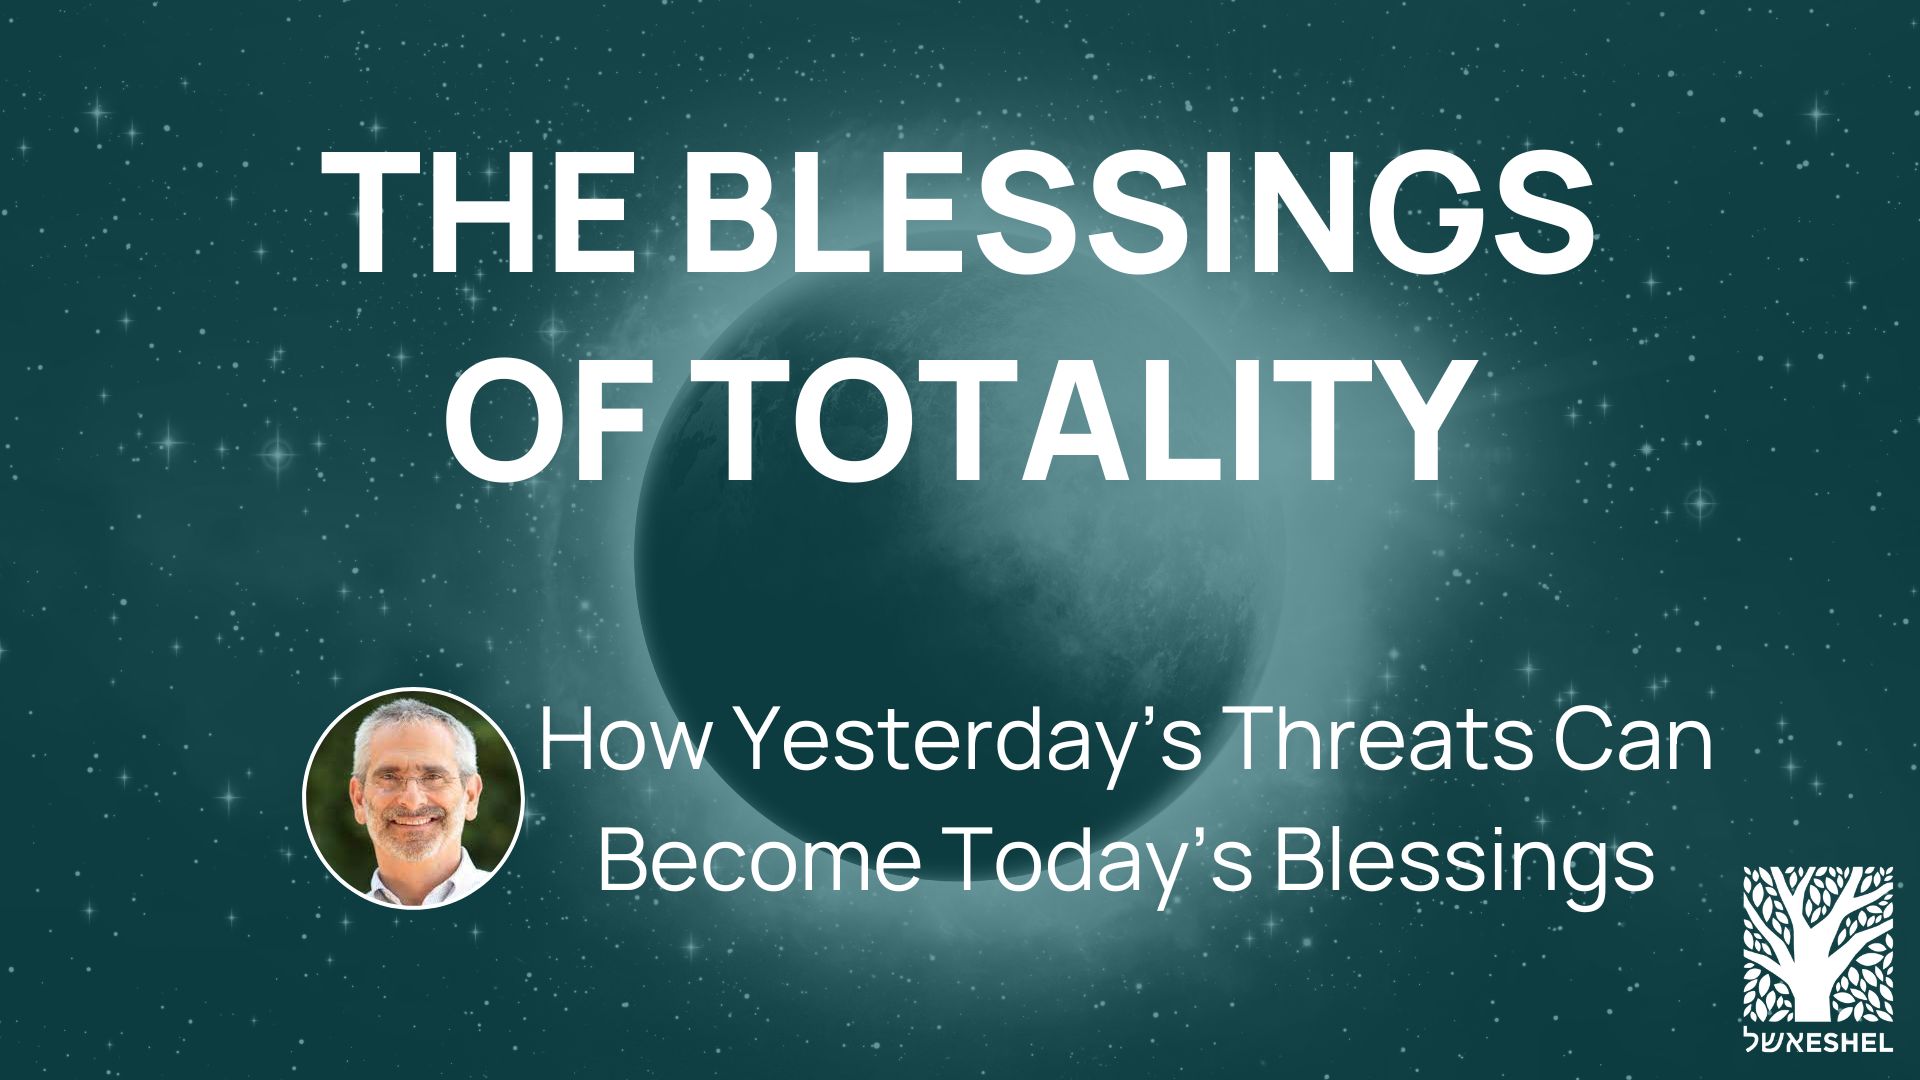 The Blessings of Totality: How Yesterday's Threats Become Today's Blessings